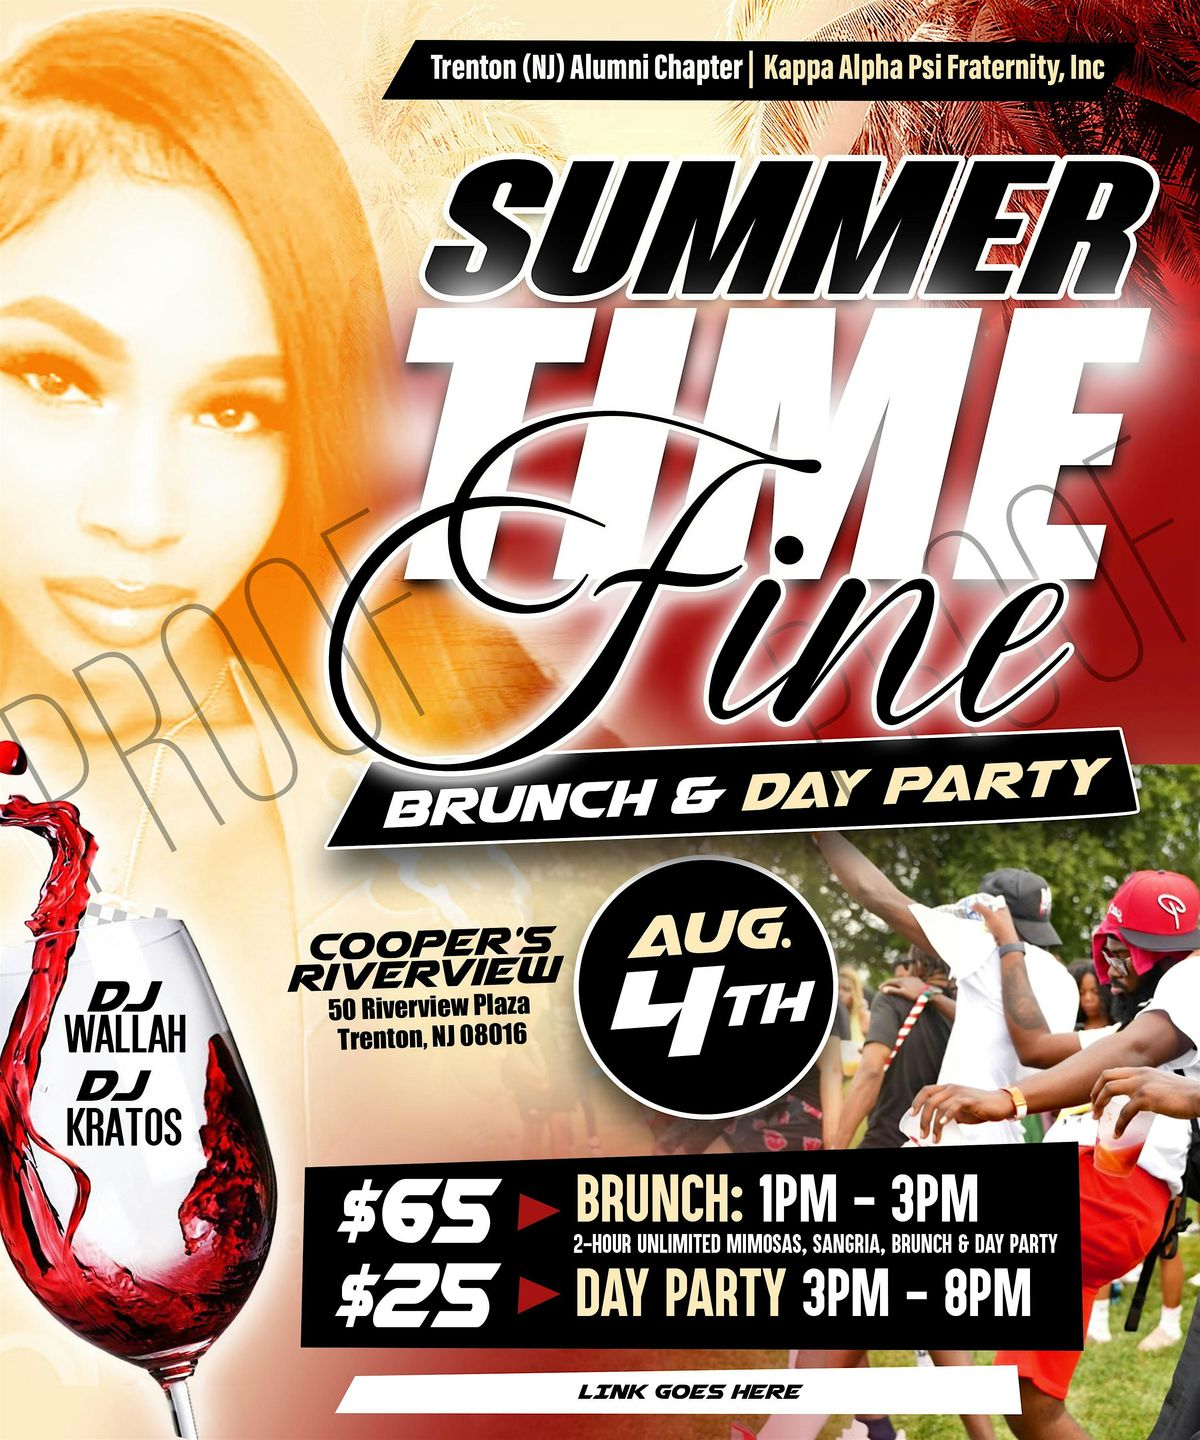 SUMMER TIME FINE: BRUNCH & DAY PARTY